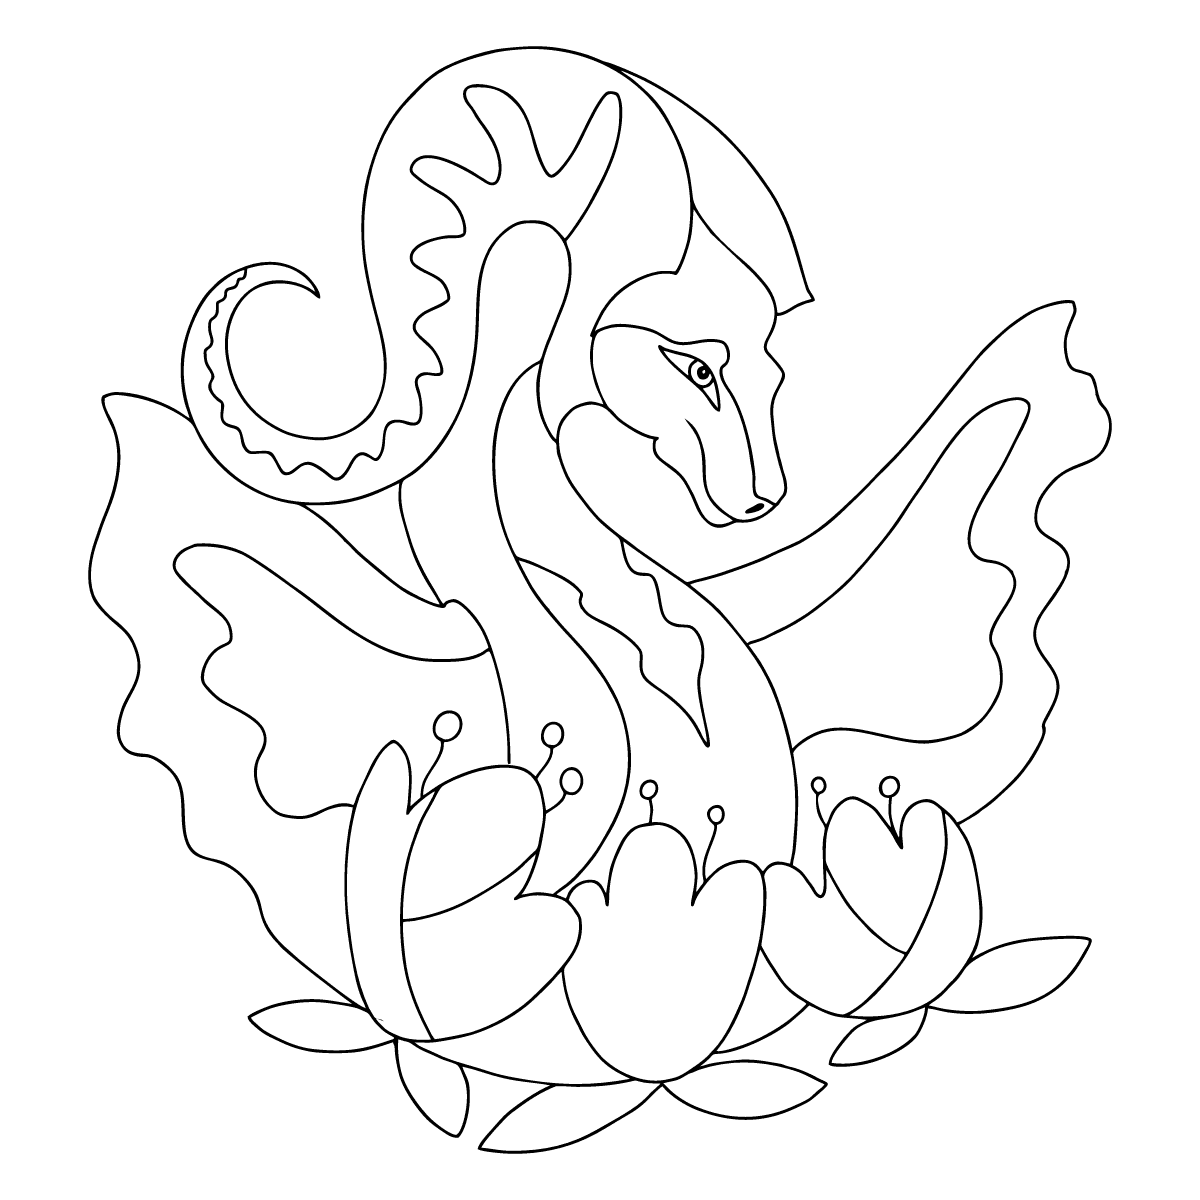 Coloring Pages with Dragons - Download, Print (A4), and Color Online